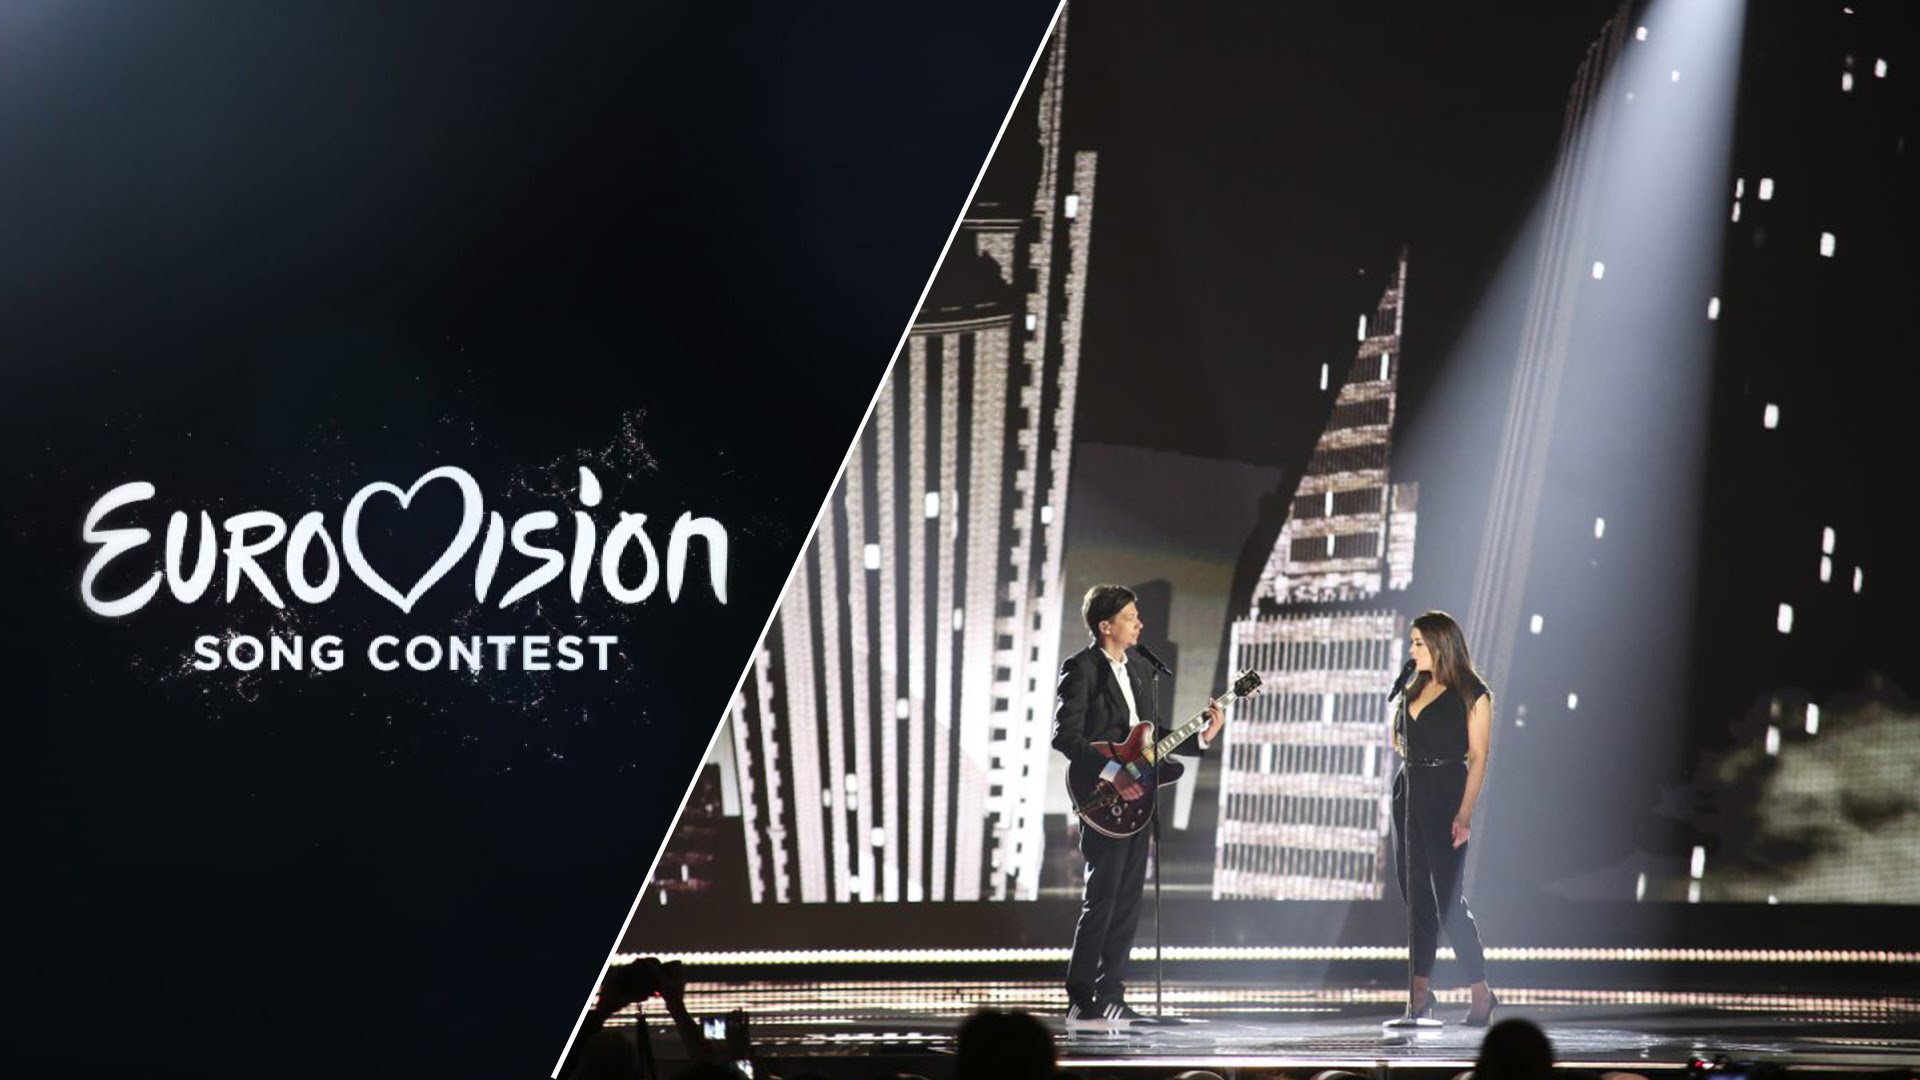 Eurovision will live stream the Song Contest finale live on YouTube